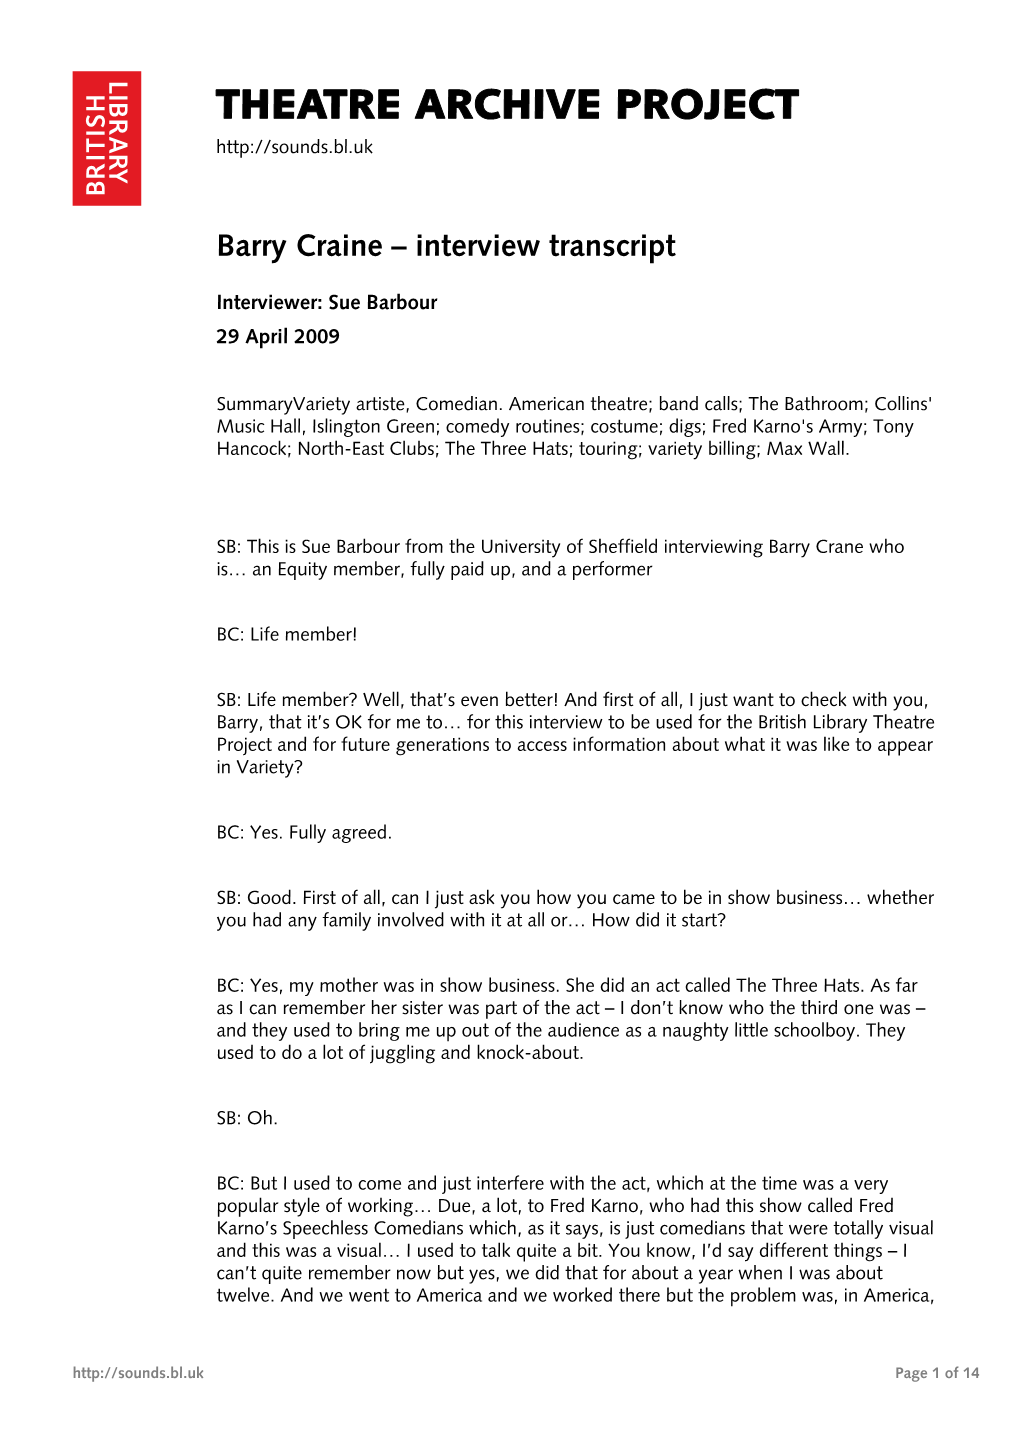 Interview with Barry Craine